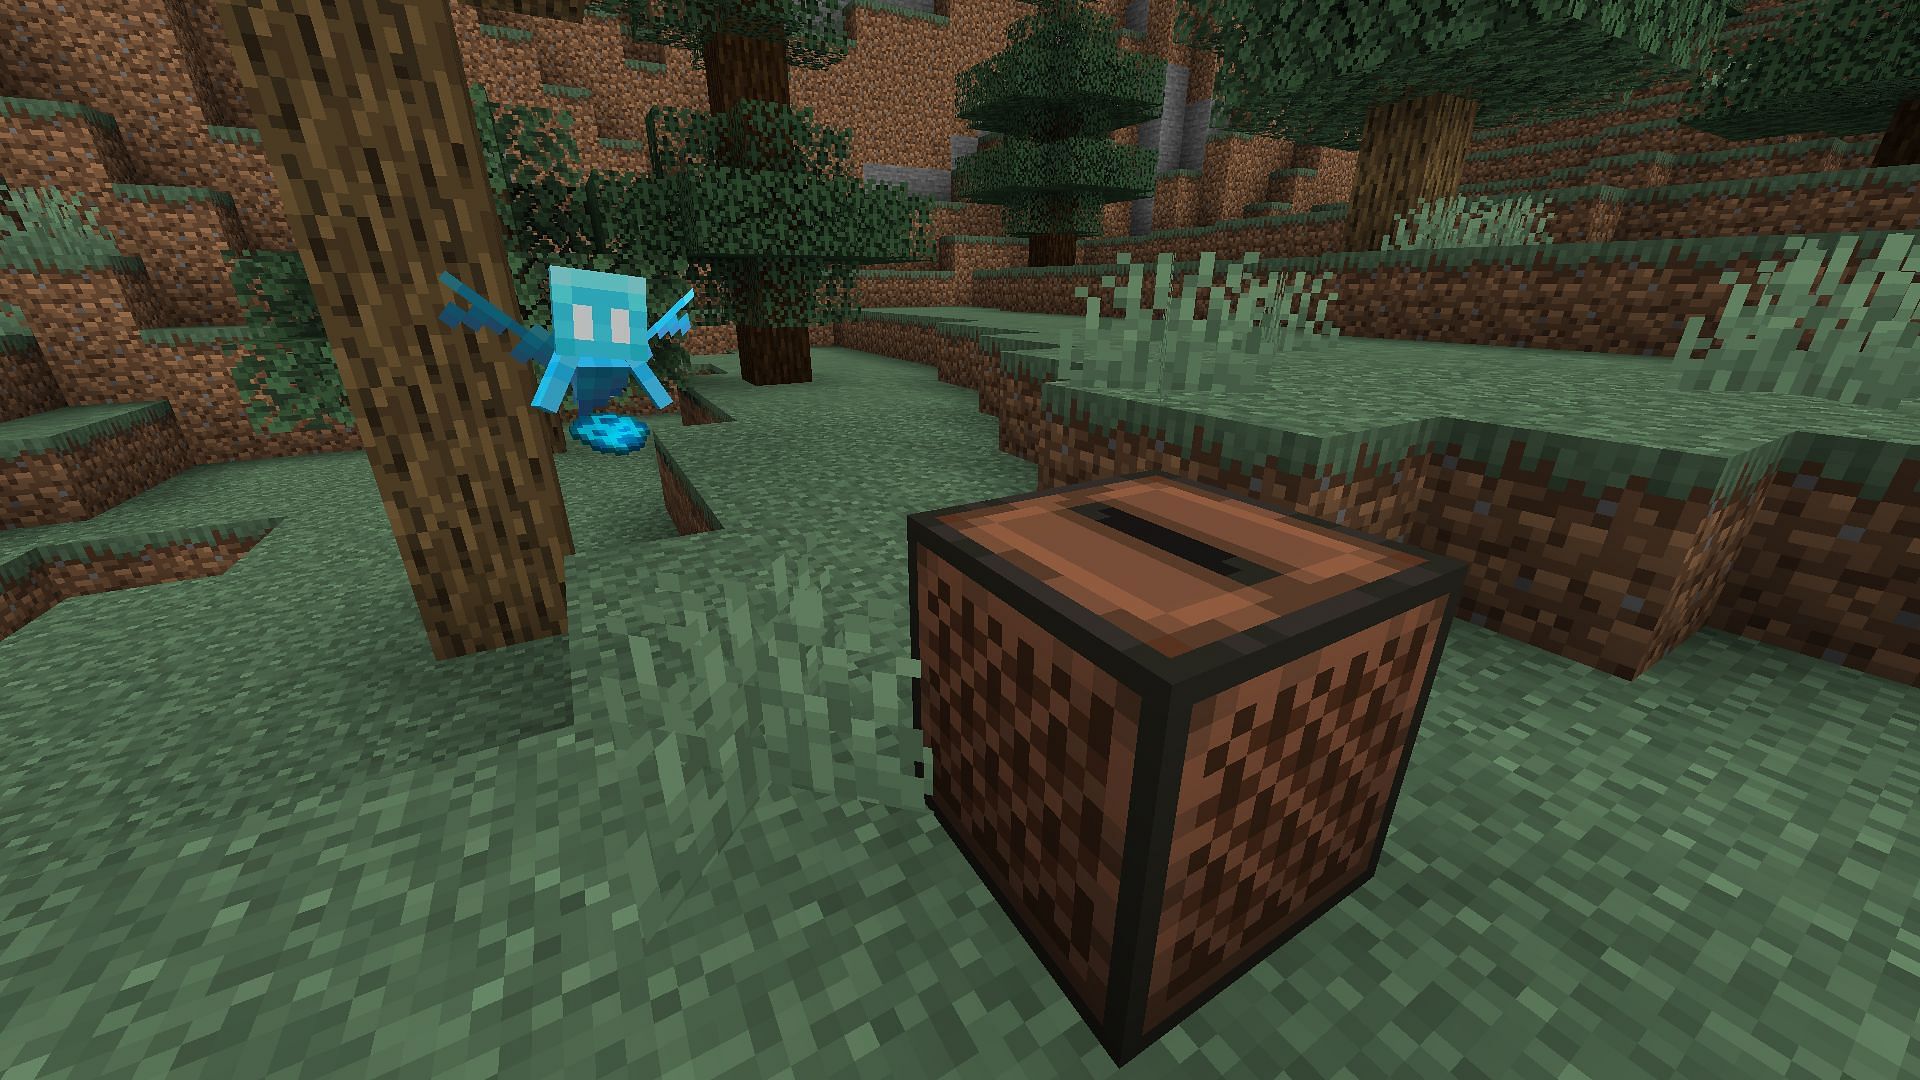 Allays will start dancing if a jukebox is playing any music disc (Image via Mojang/Minecraft 1.19.1 update)